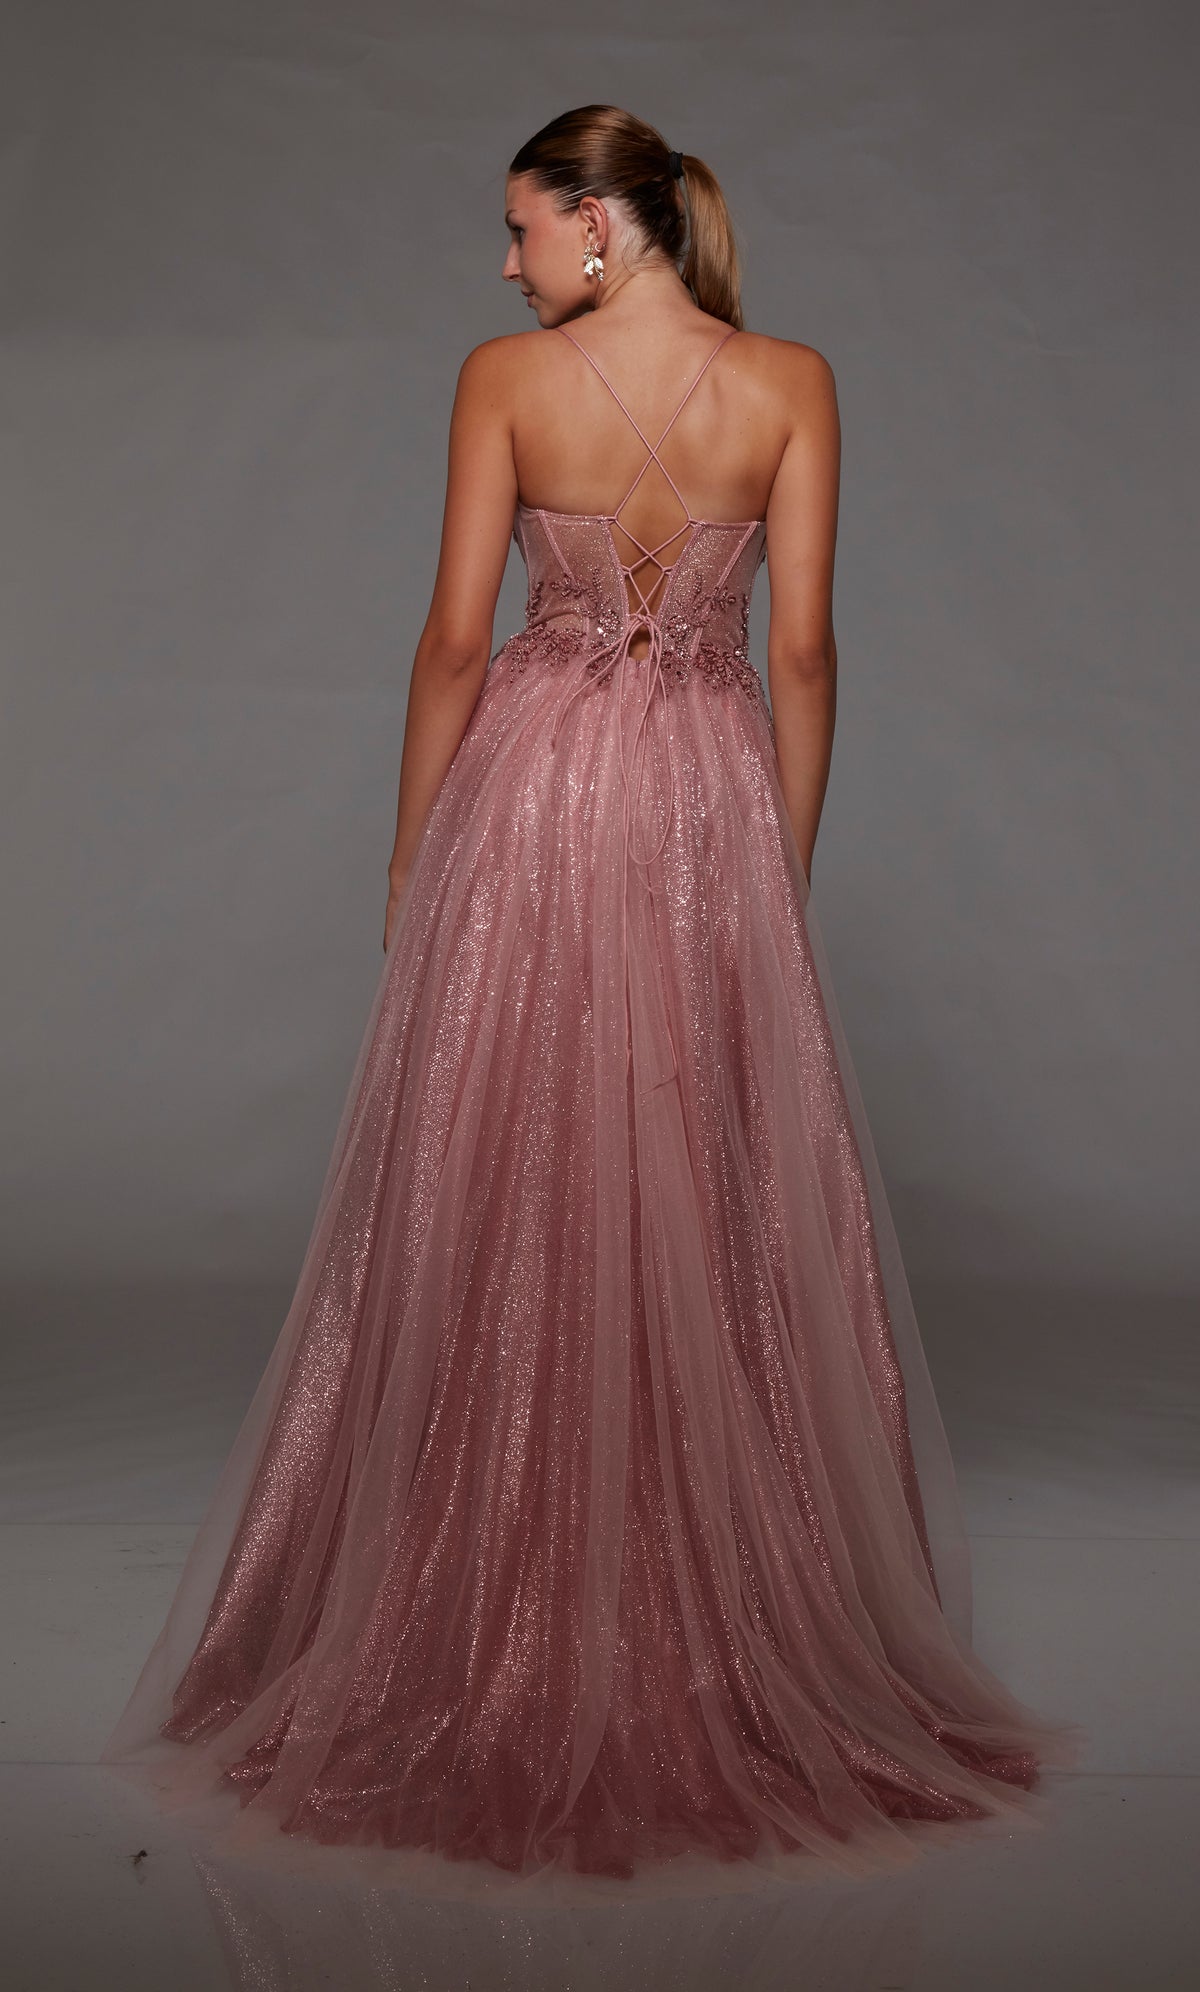 Pink glitter tulle corset dress with sheer beaded lace bodice, high slit, lace-up back, and an touch of train for an dreamy and enchanting vibe.